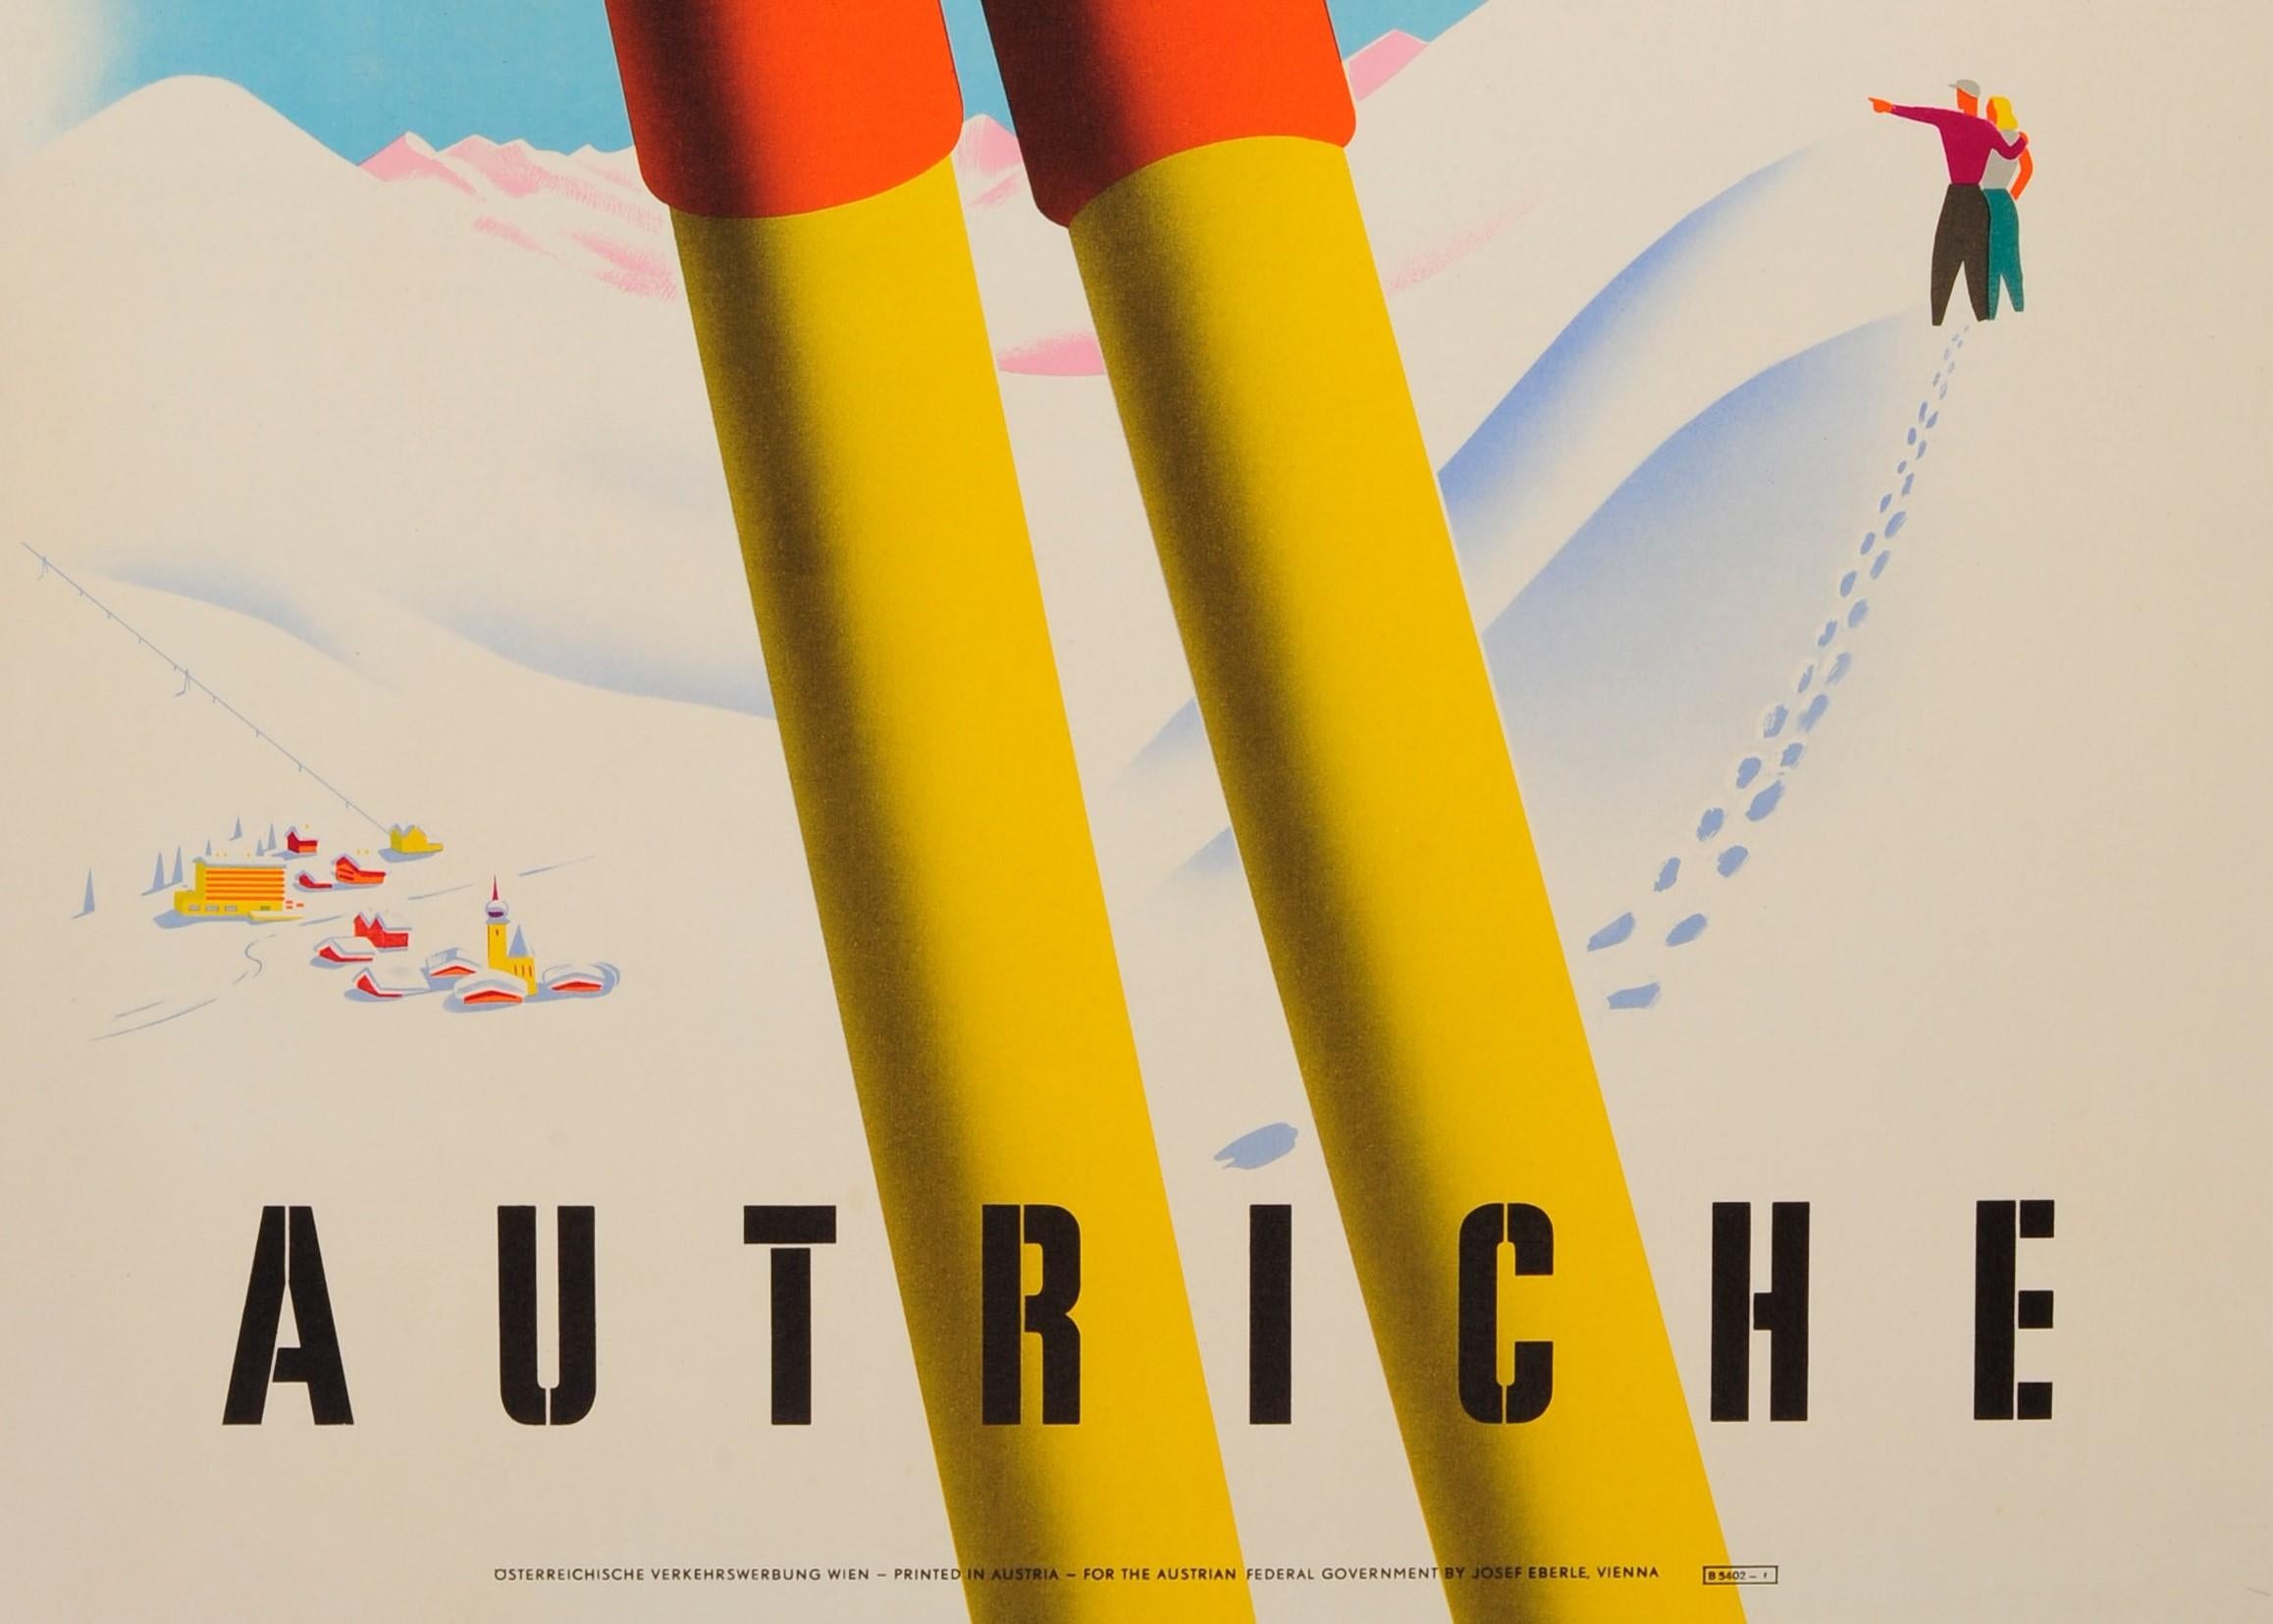 Original vintage winter sport and skiing travel poster for Austria / Autriche. Great design depicting a fun and romantic image of a pair of ski poles leaning into each other with the faces of a smiling man and lady on the handles at the top, the